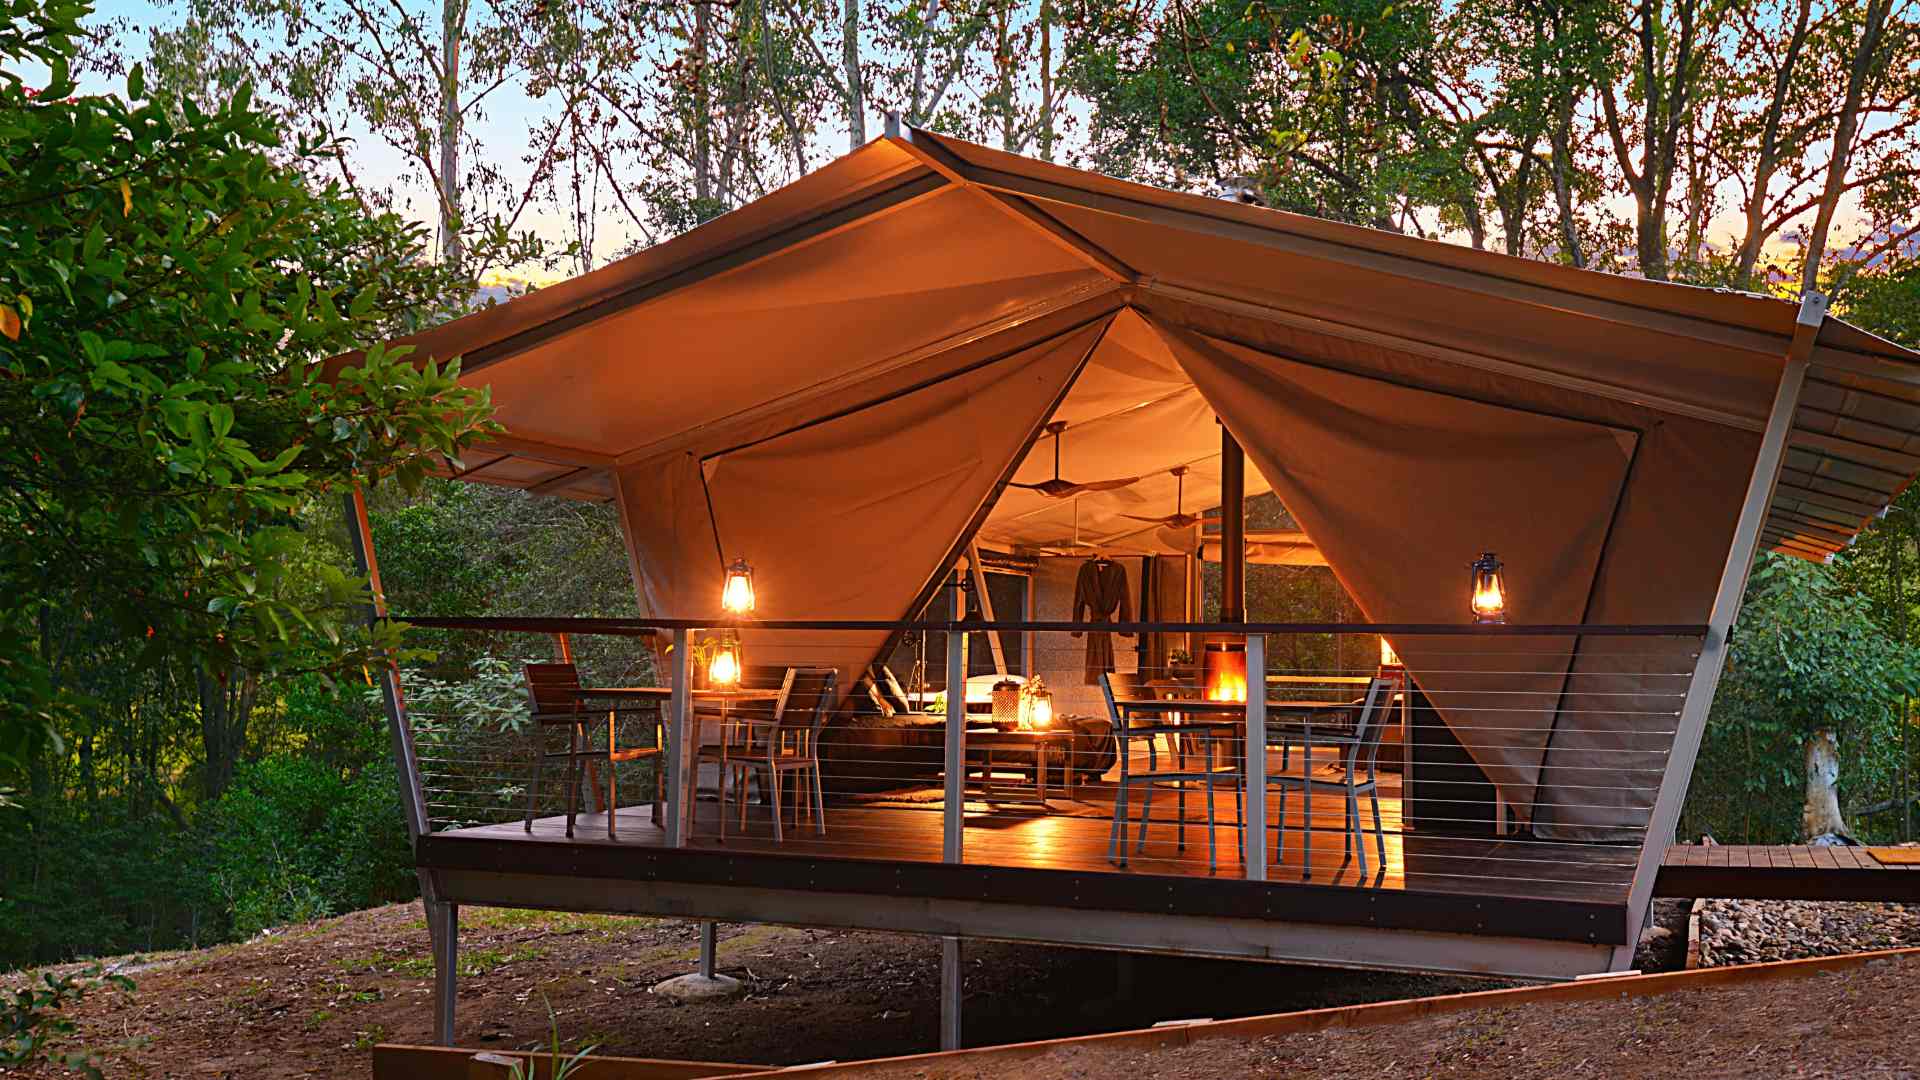 Starry Nights Airbnb Glamping tent in Sunshine Coast Hinterland